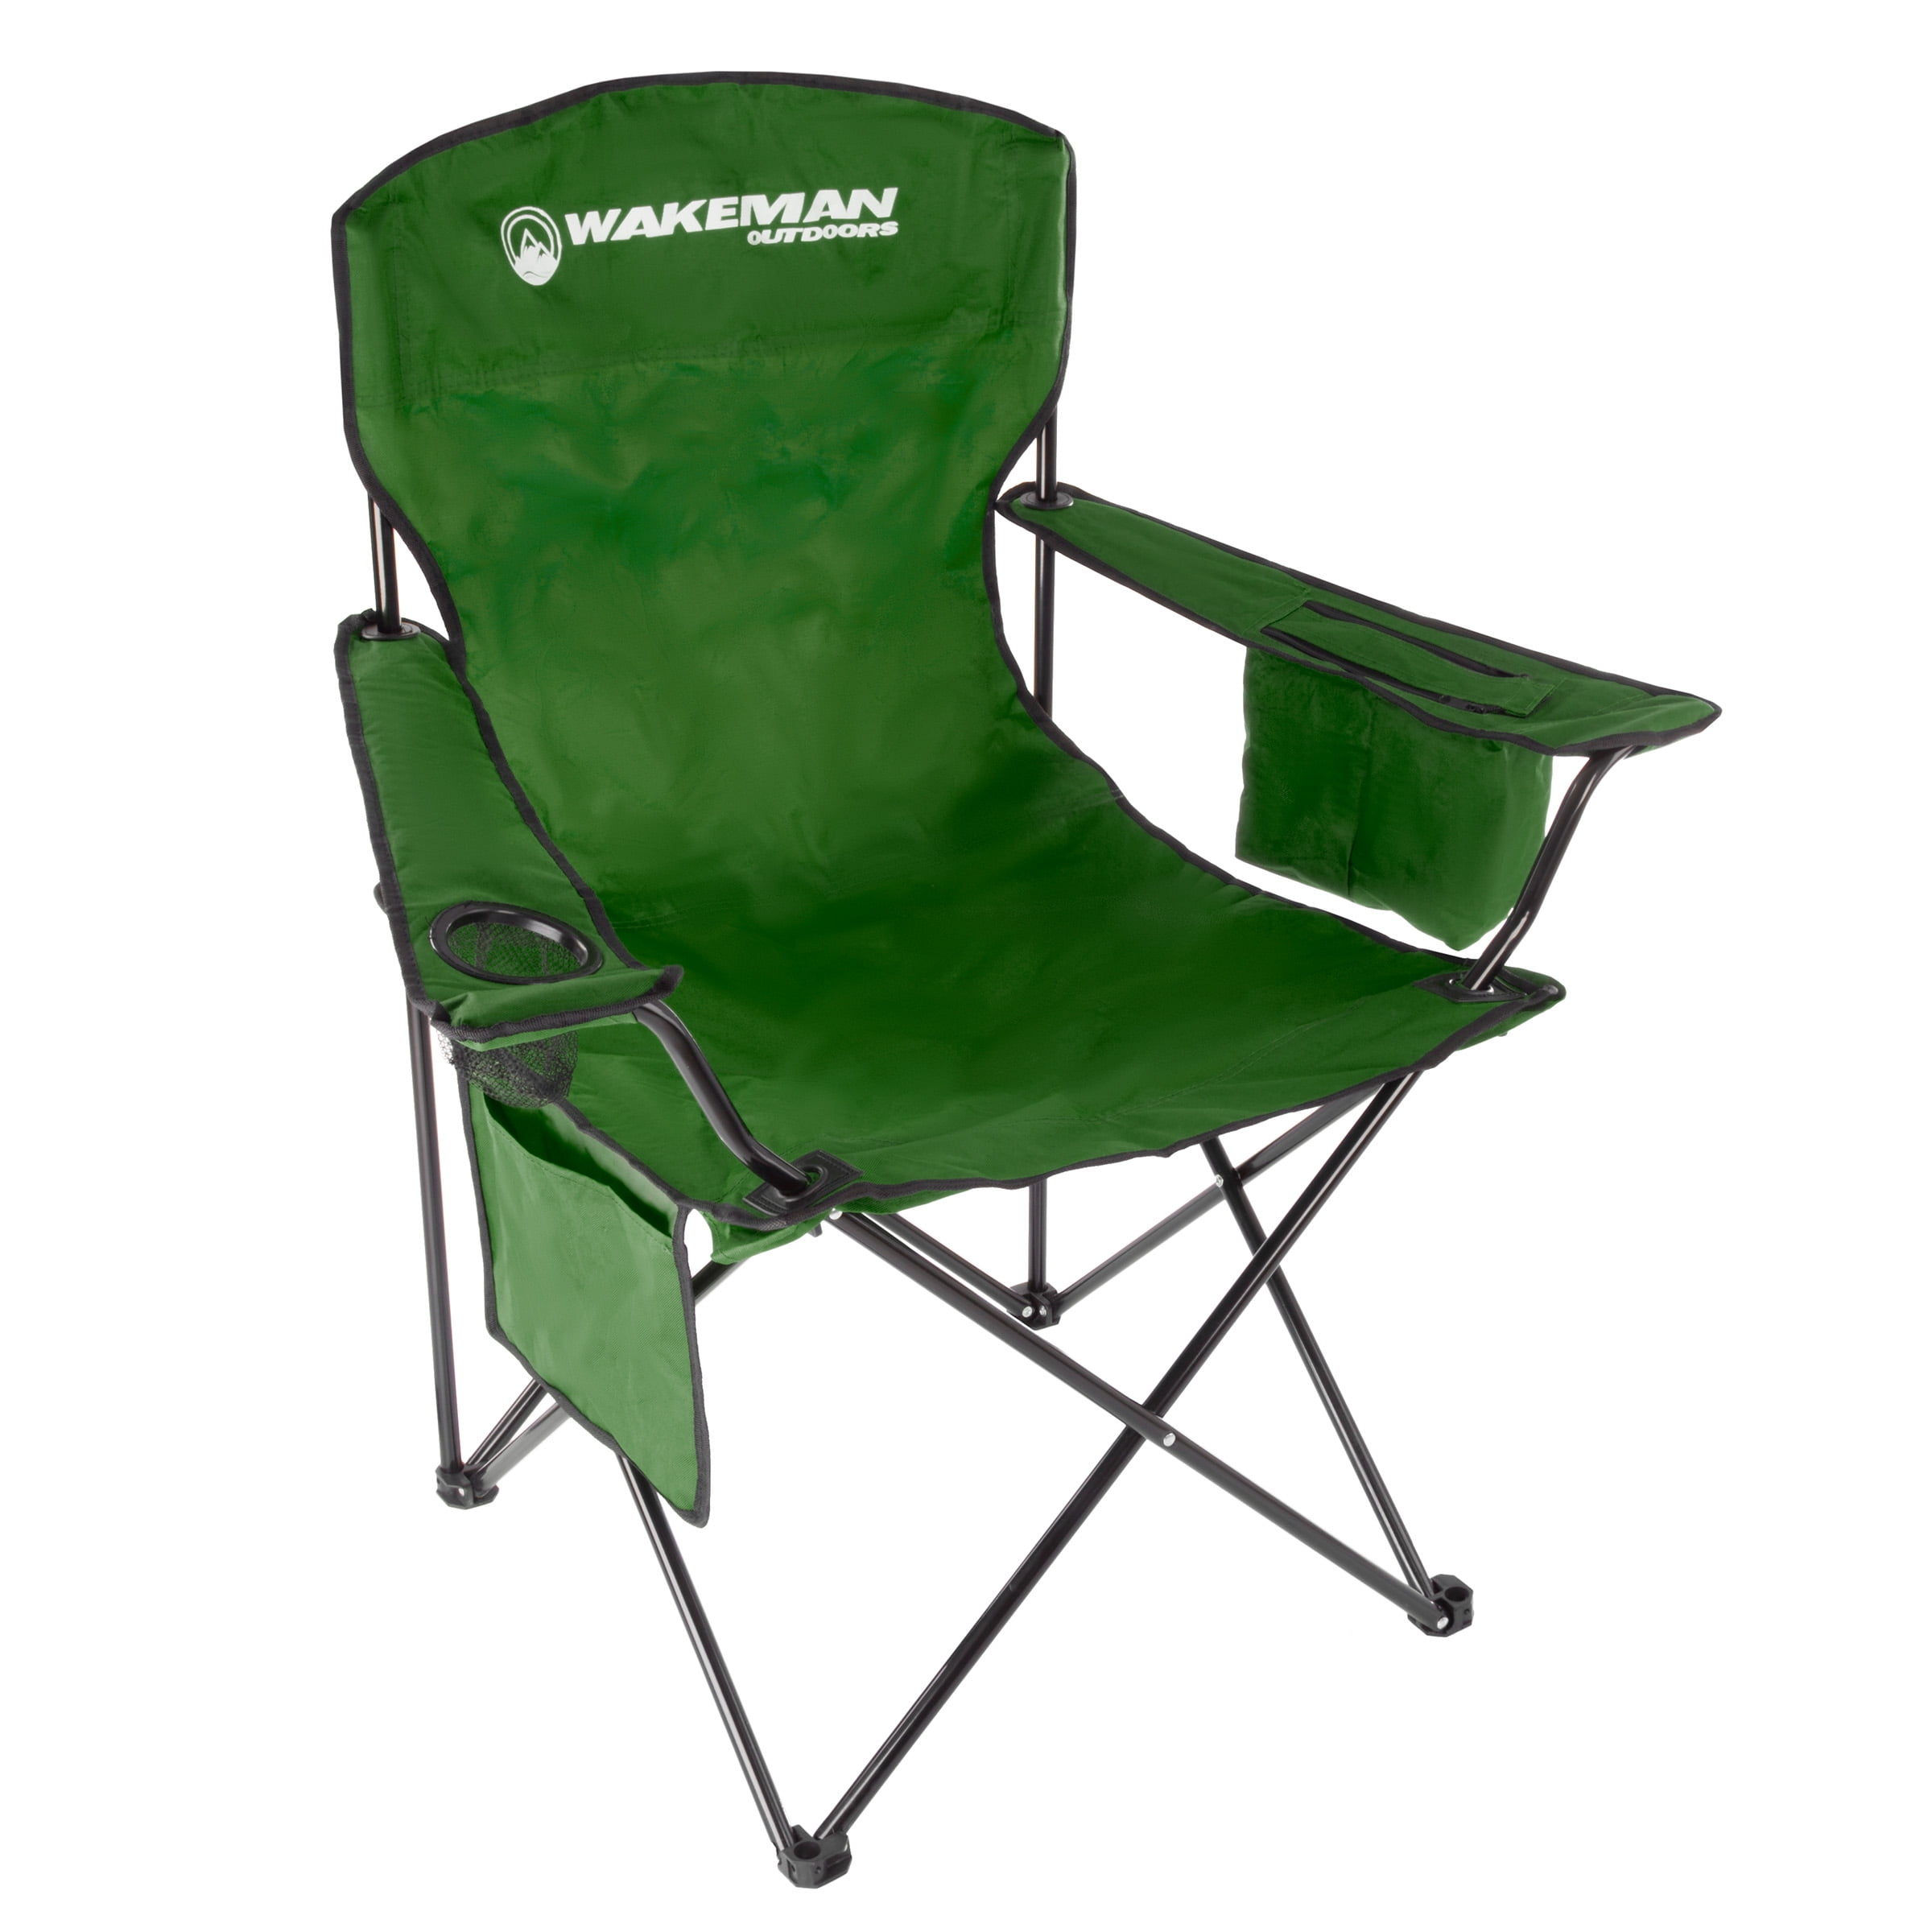 Oversized Camp Chair300lb Capacity Big Tall Quad Seat